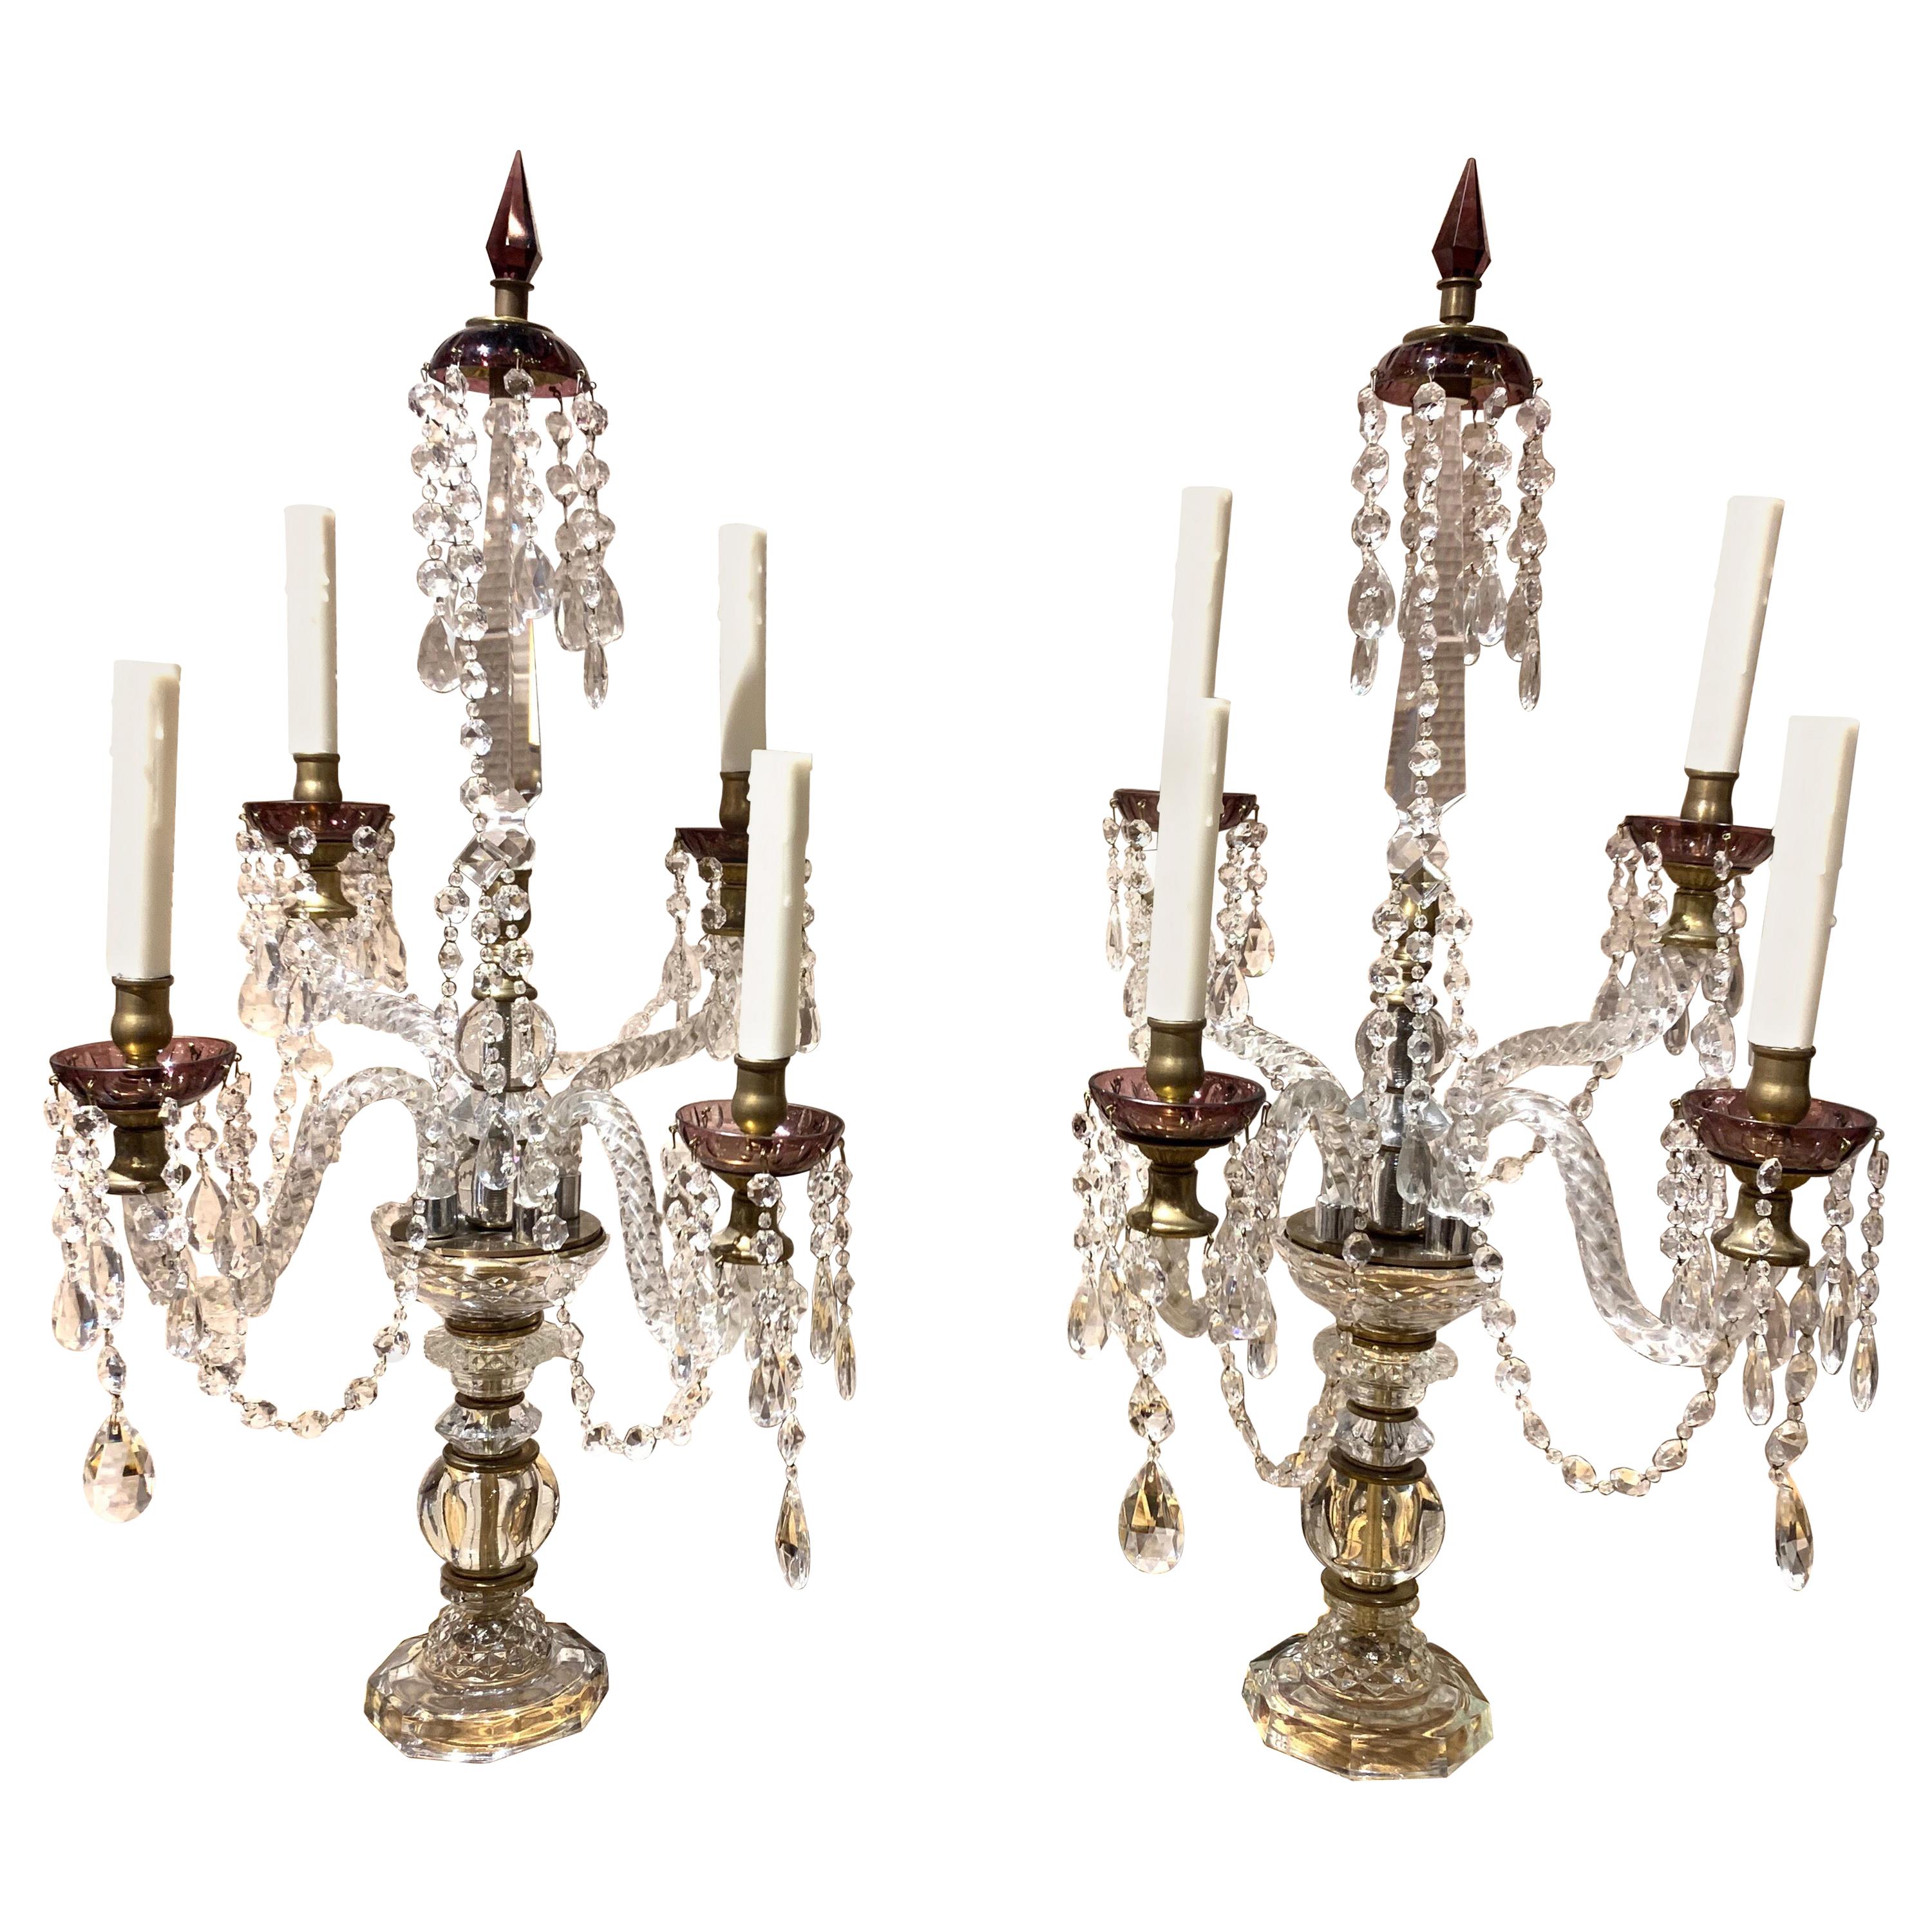 Pair of 19th Century English Waterford Crystal 4-Light Girandoles For Sale